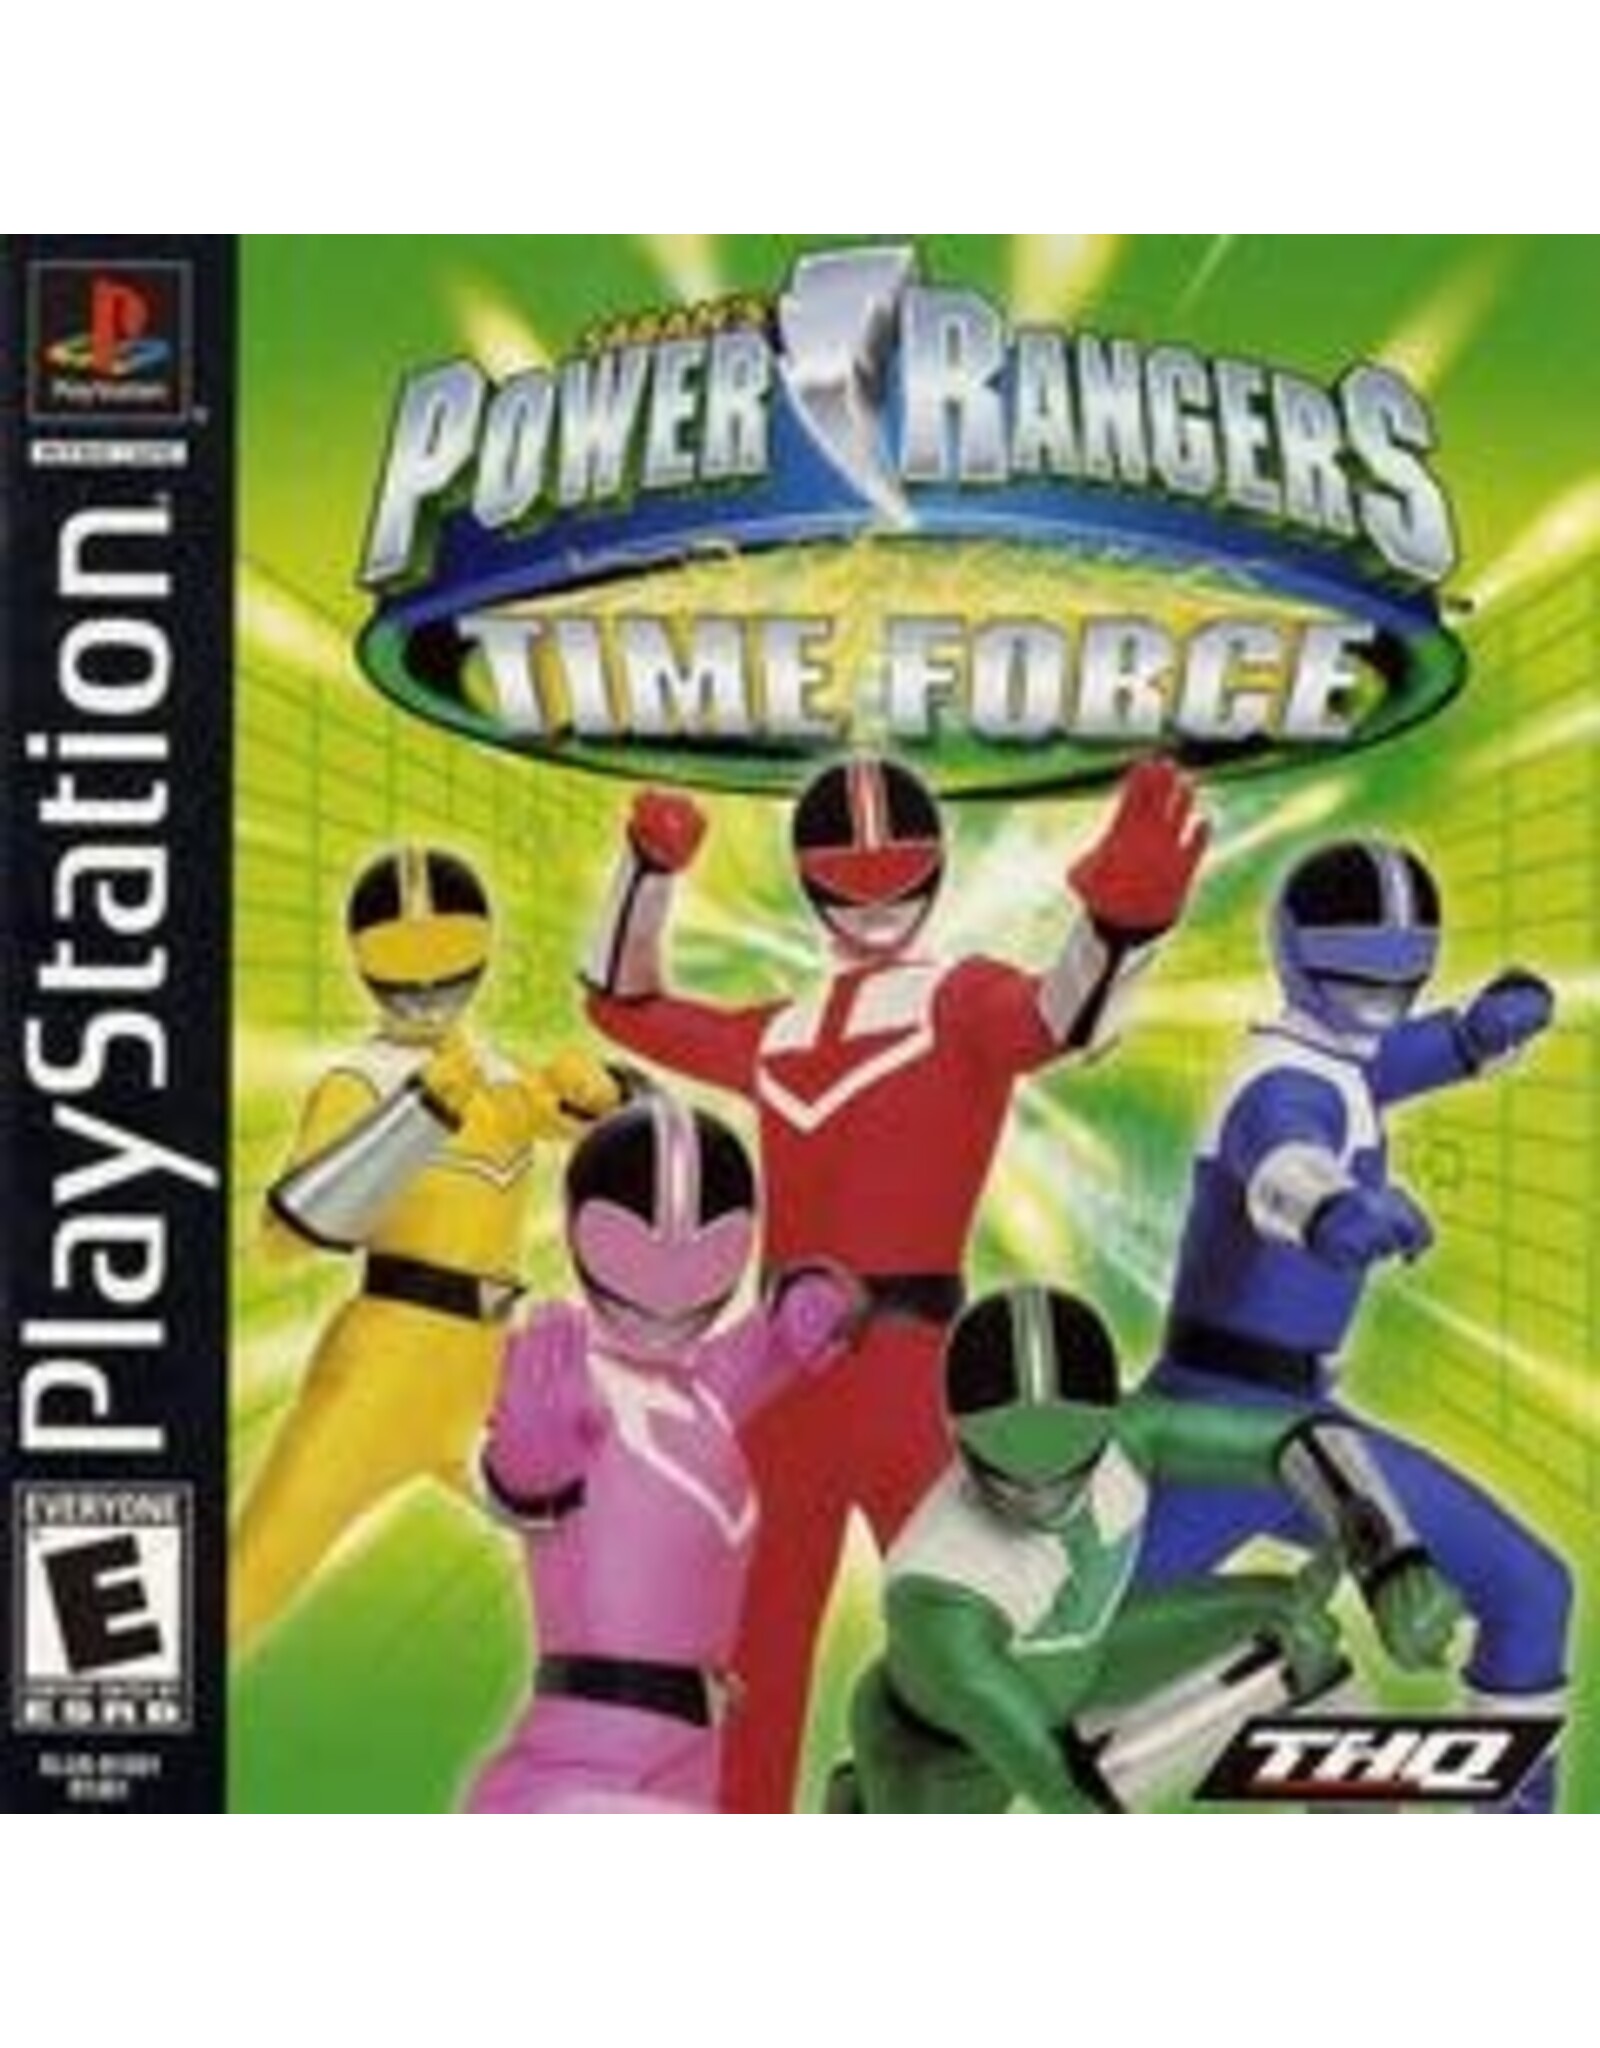 Playstation Power Rangers Time Force (Brand New, Crack in Jewel Case Cover)